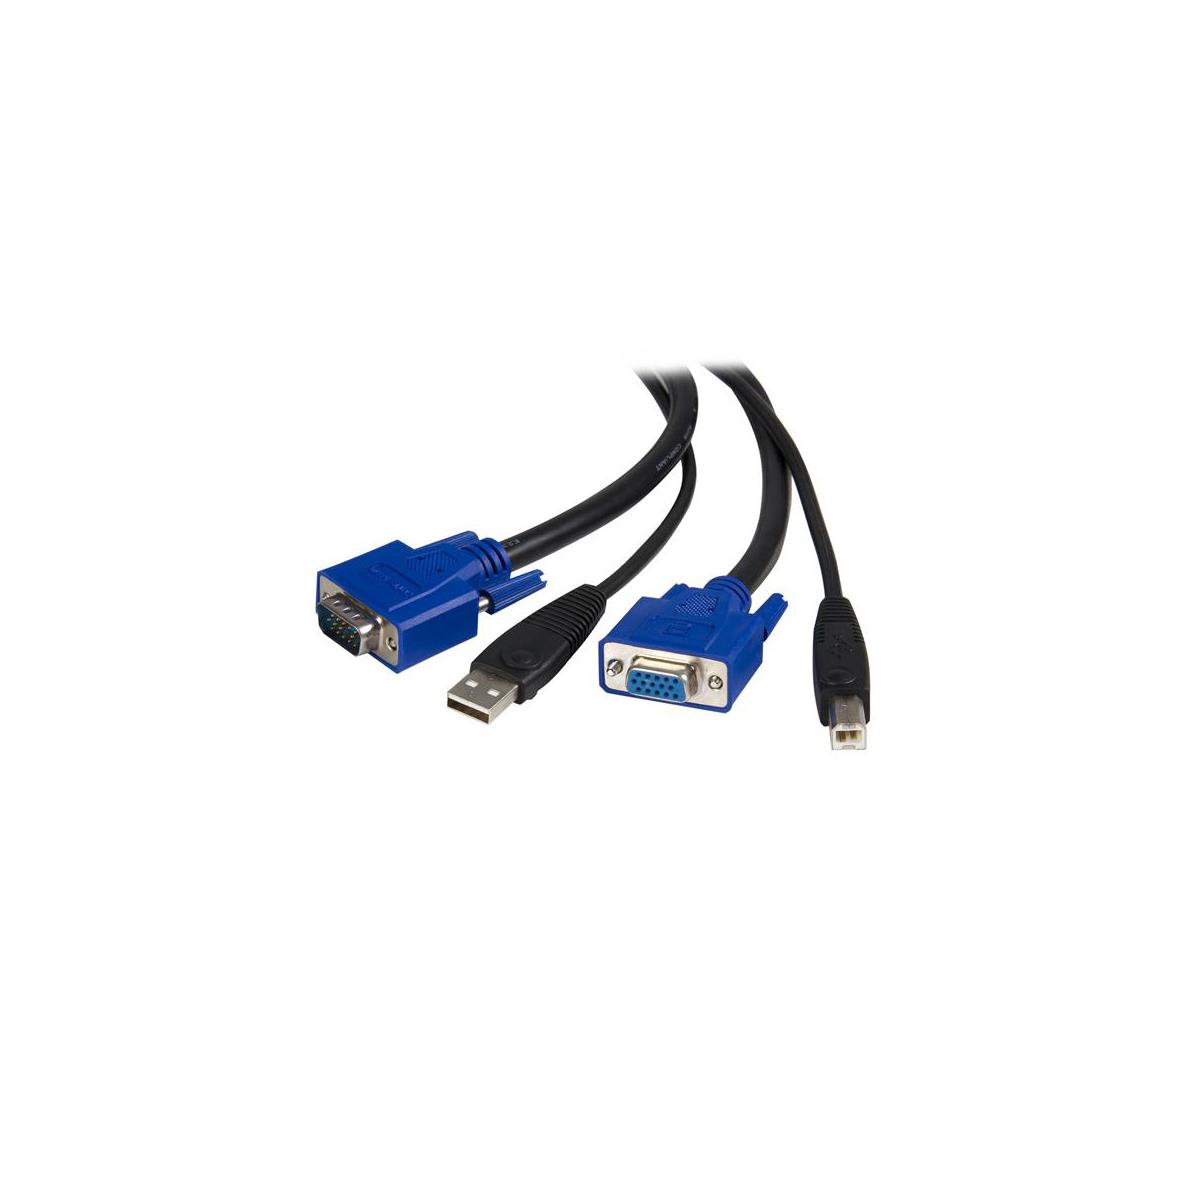 Image of StarTech 6' 2-in-1 USB KVM Cable